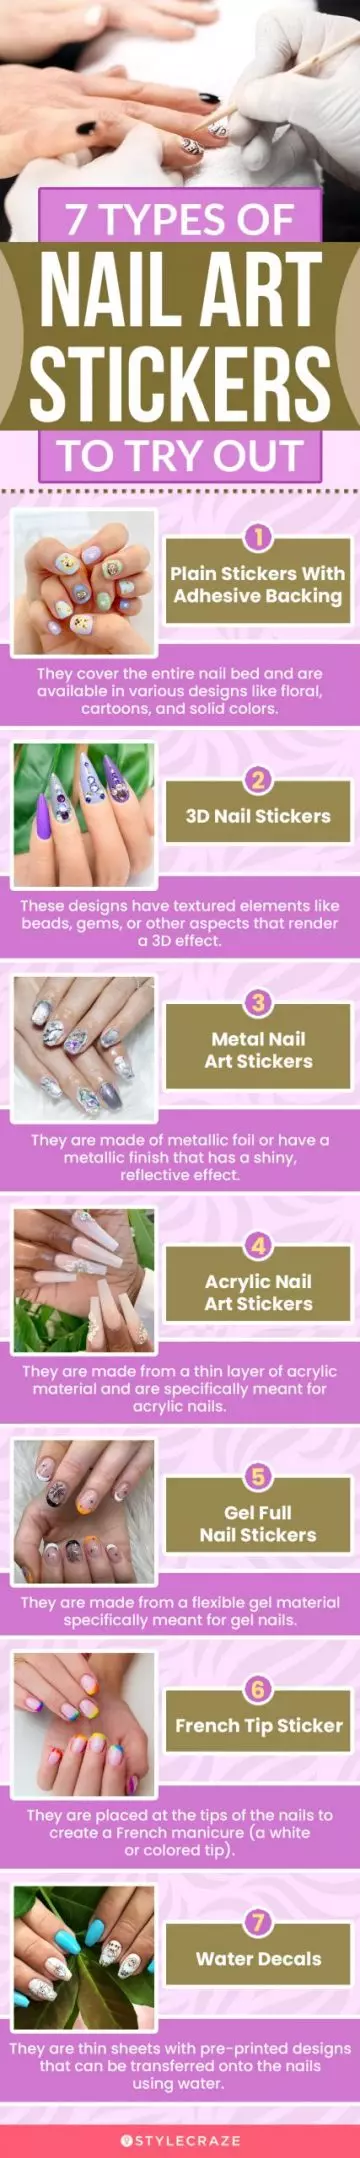 7 types of nail art stickers to try out (infographic)